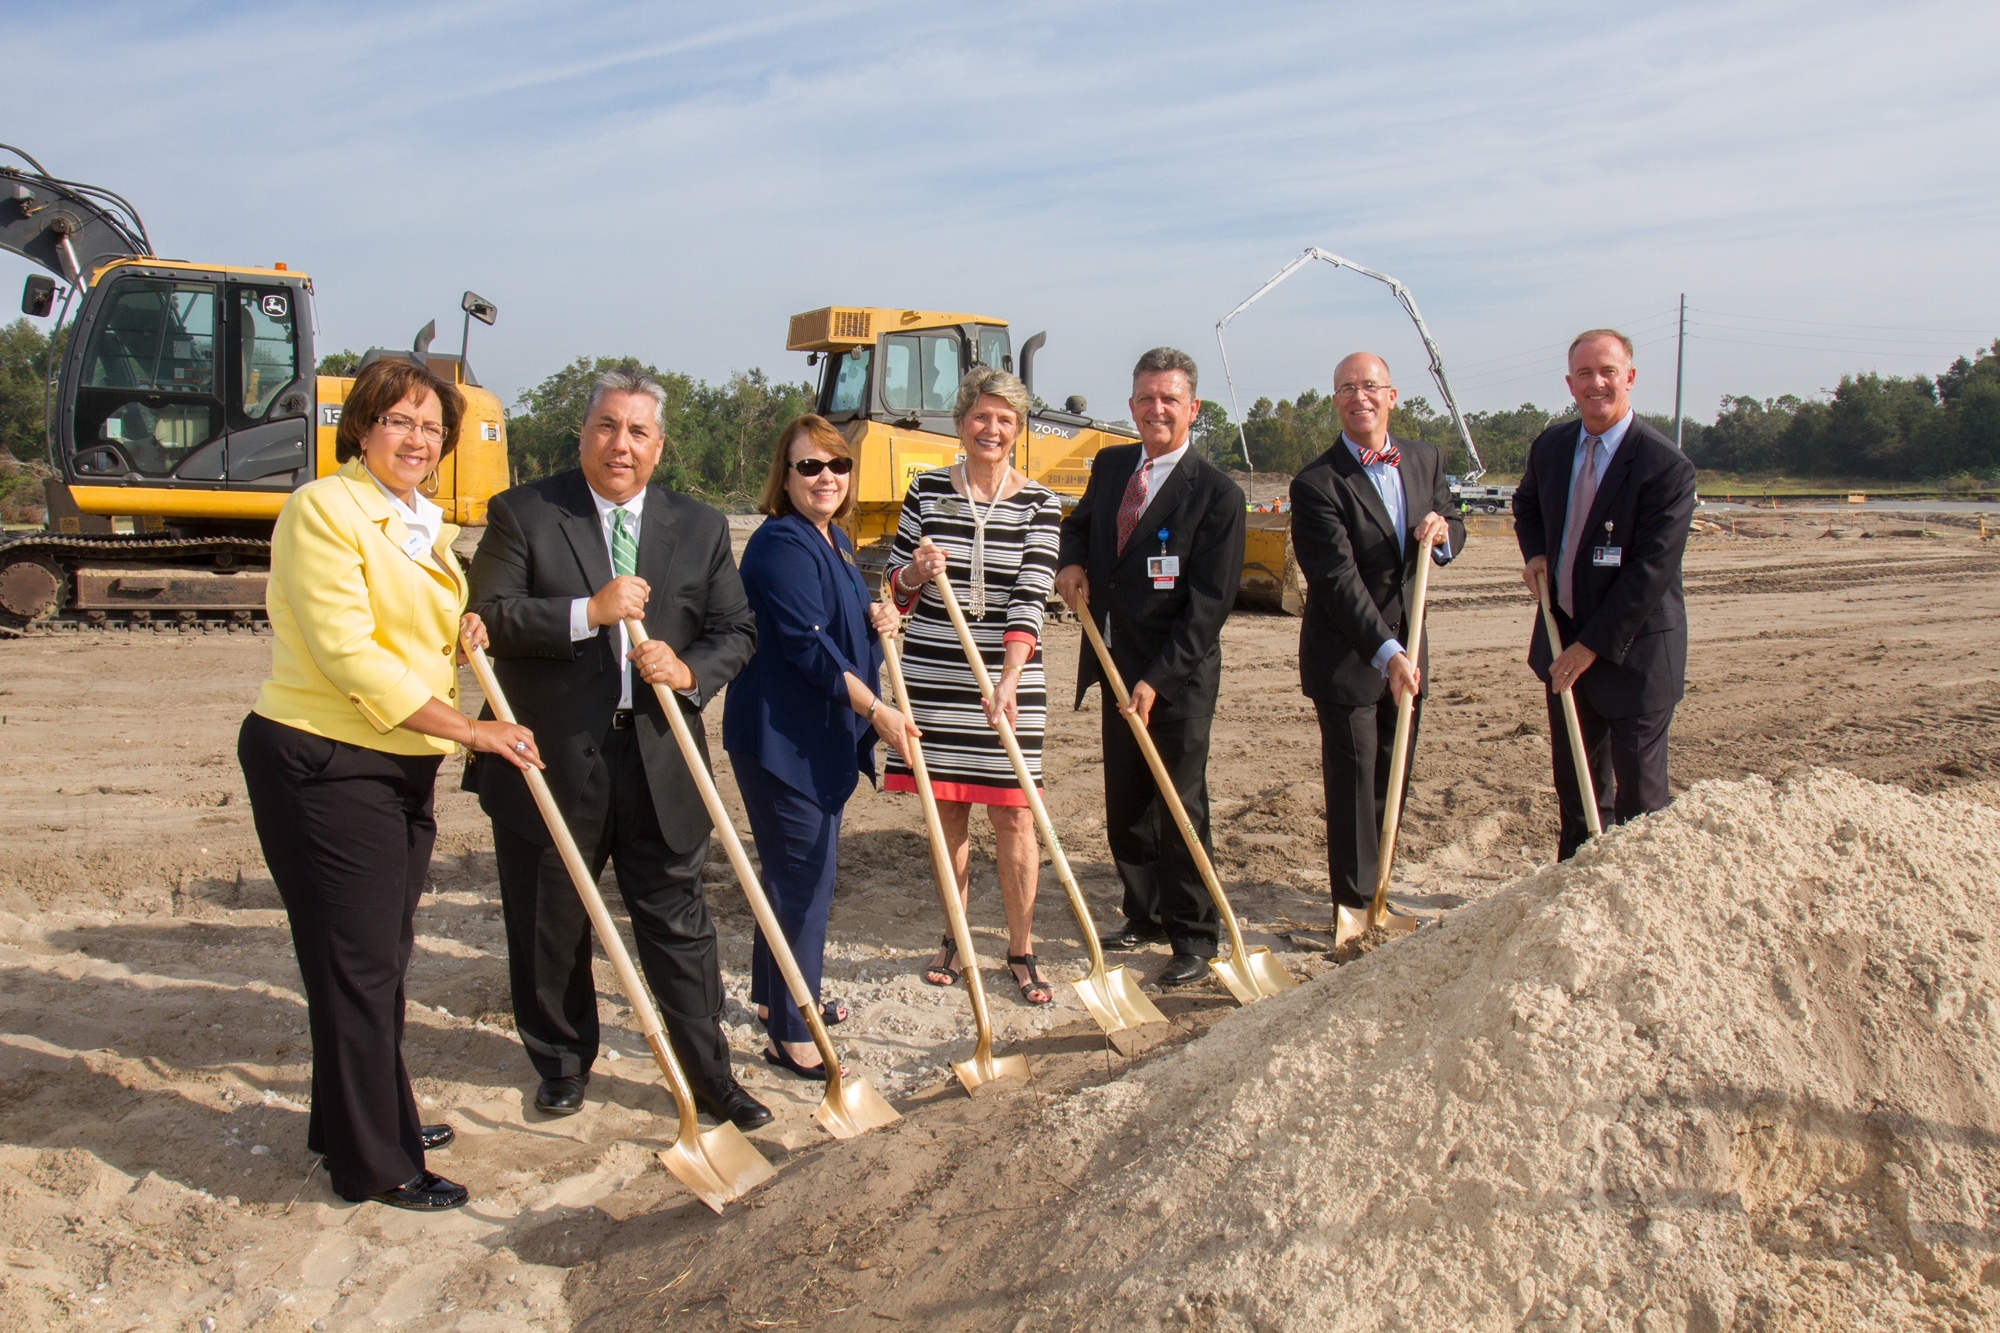 Cornerstone Hospice broke ground on a 10-bed unit, which will be part of the new Orlando Health Center for Rehabilitation. With their shovels are Wendy Terry, Rob Adrid, Tracy Swanson, Norma Sutton, Nick Buchholz, Chuck Lee and Mark Marsh.